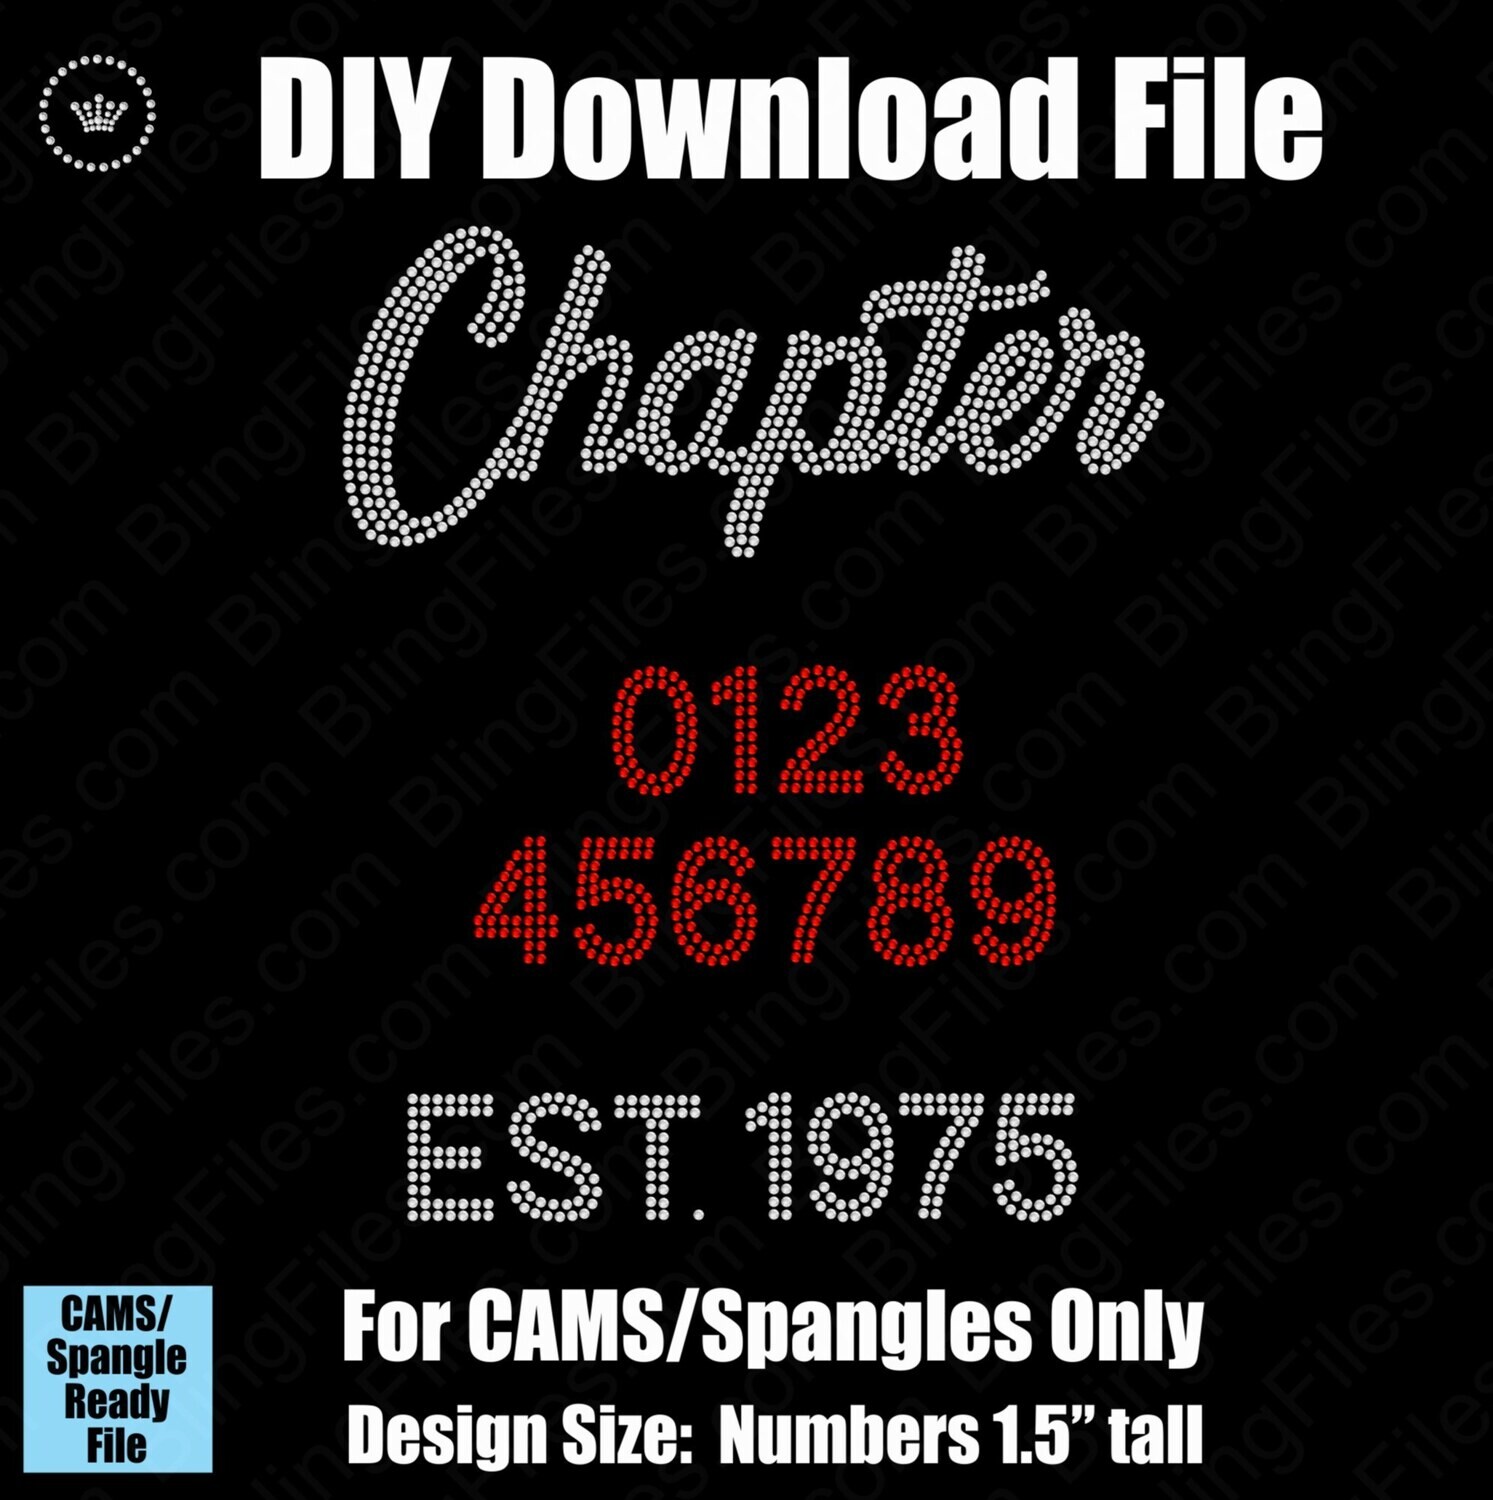 Chapter Birthday with Established Year Numbers Download File - CAMS/ProSpangle